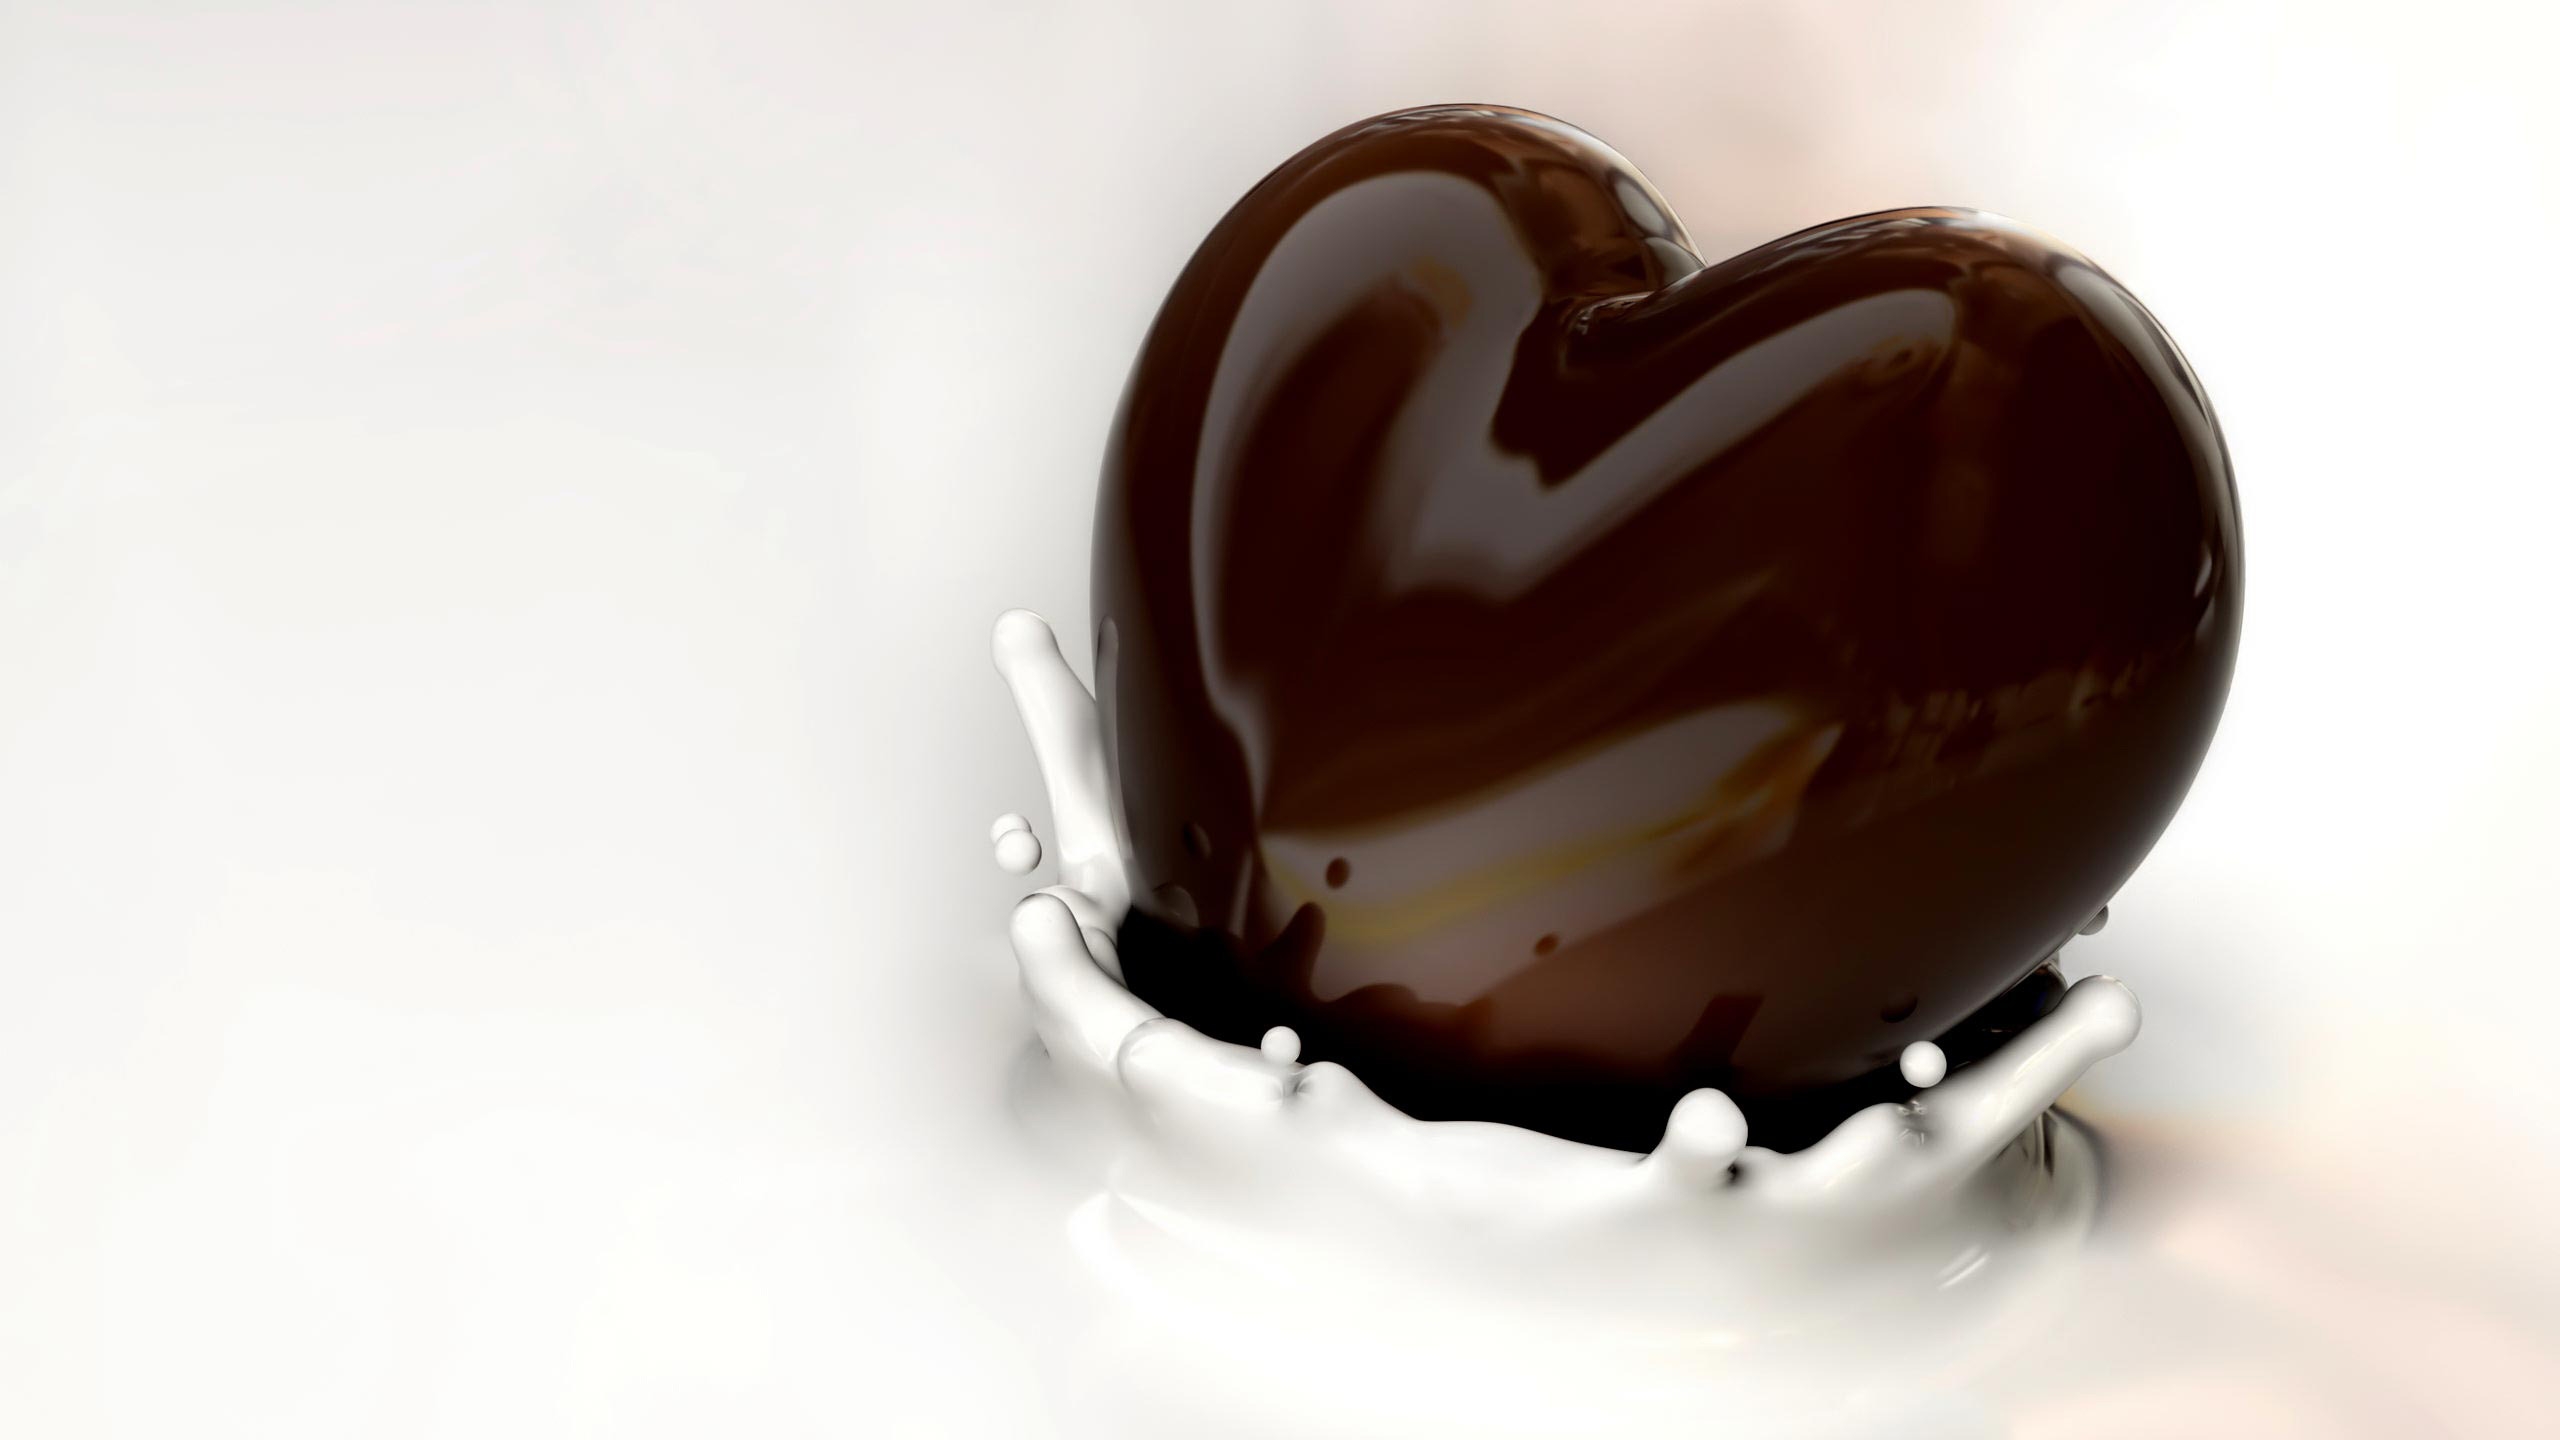 Heart Chocolate and Milk for 2560x1440 HDTV resolution